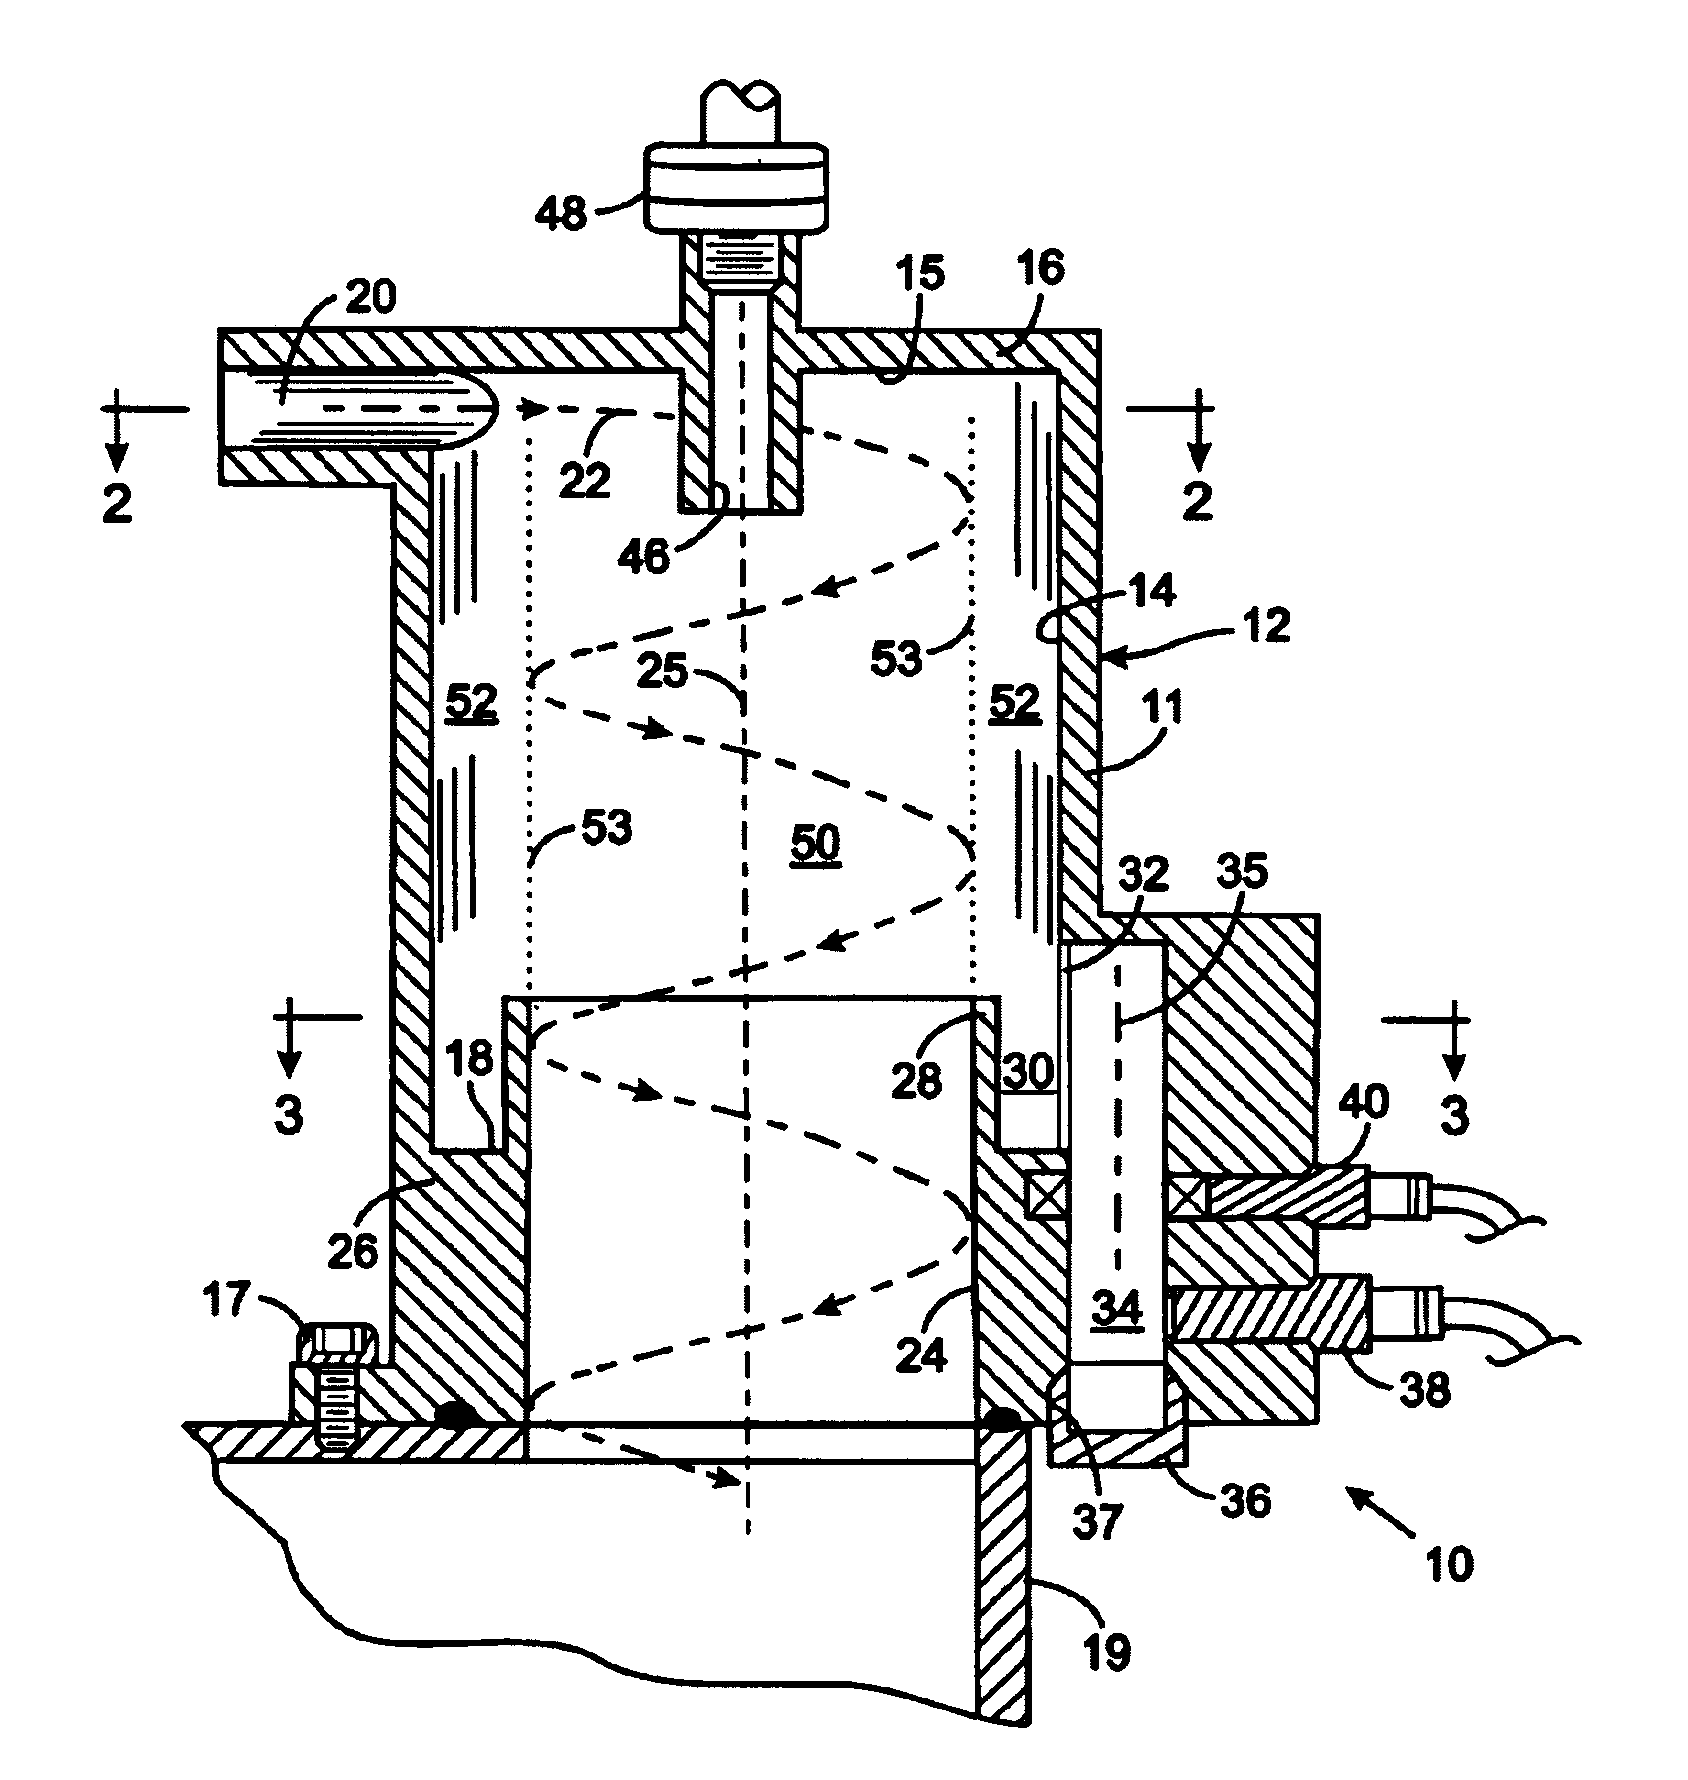 Three-phase cyclonic fluid separator with a debris trap